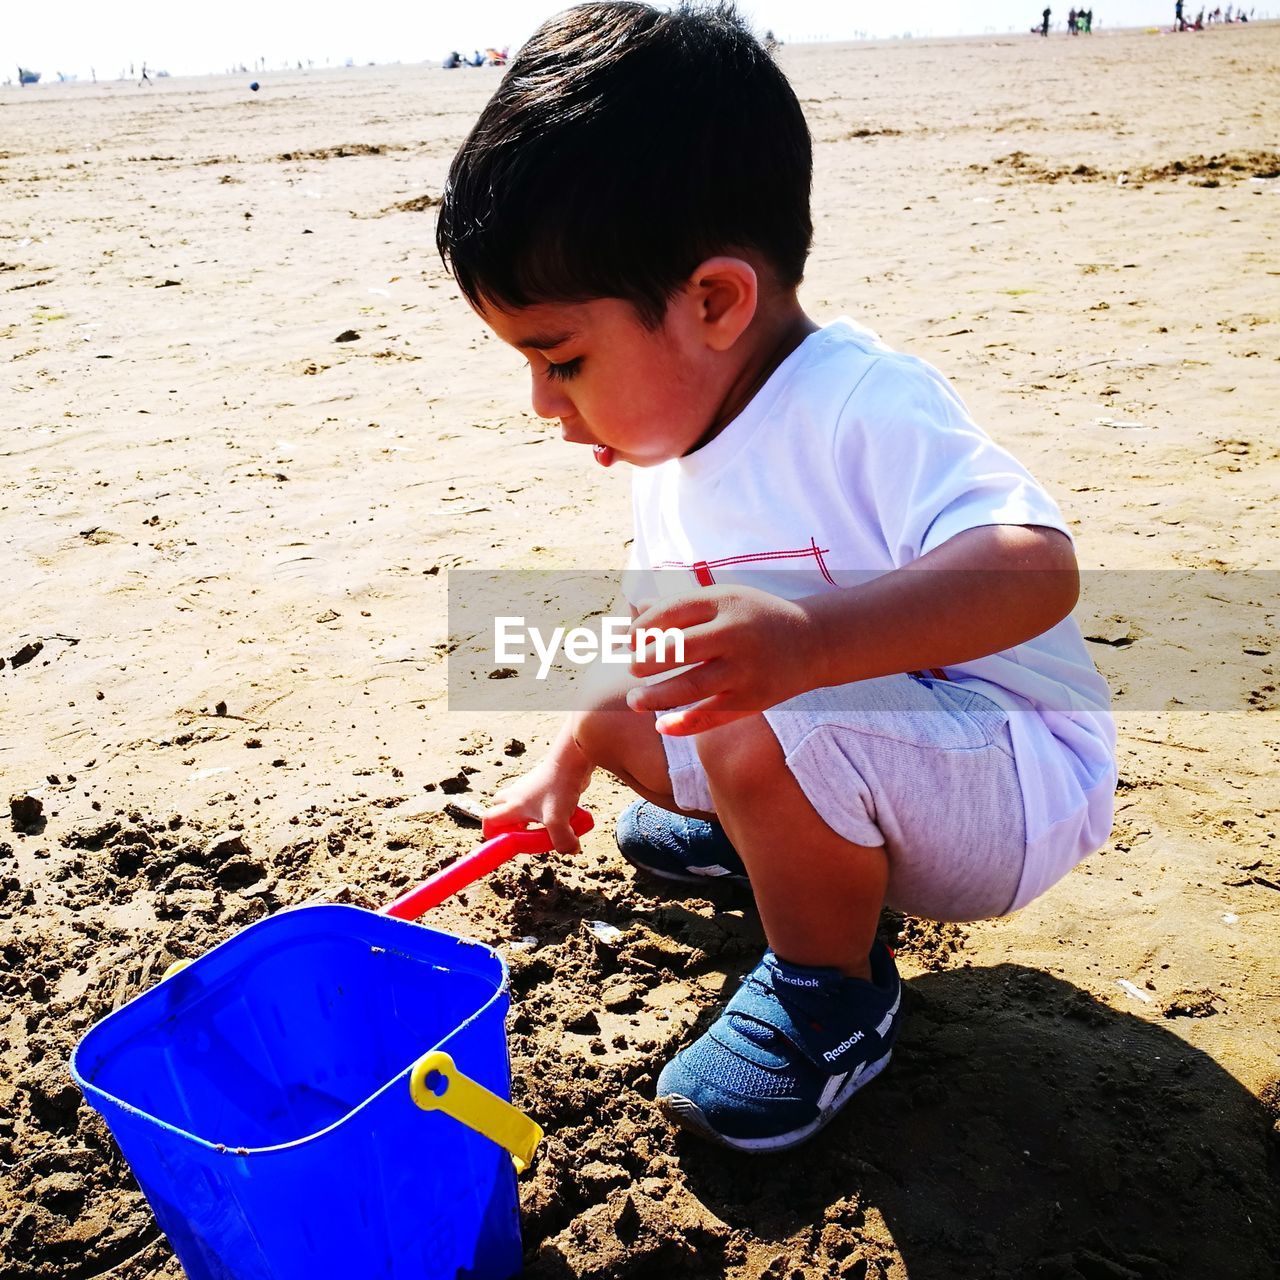 Boy playing with toy at beach